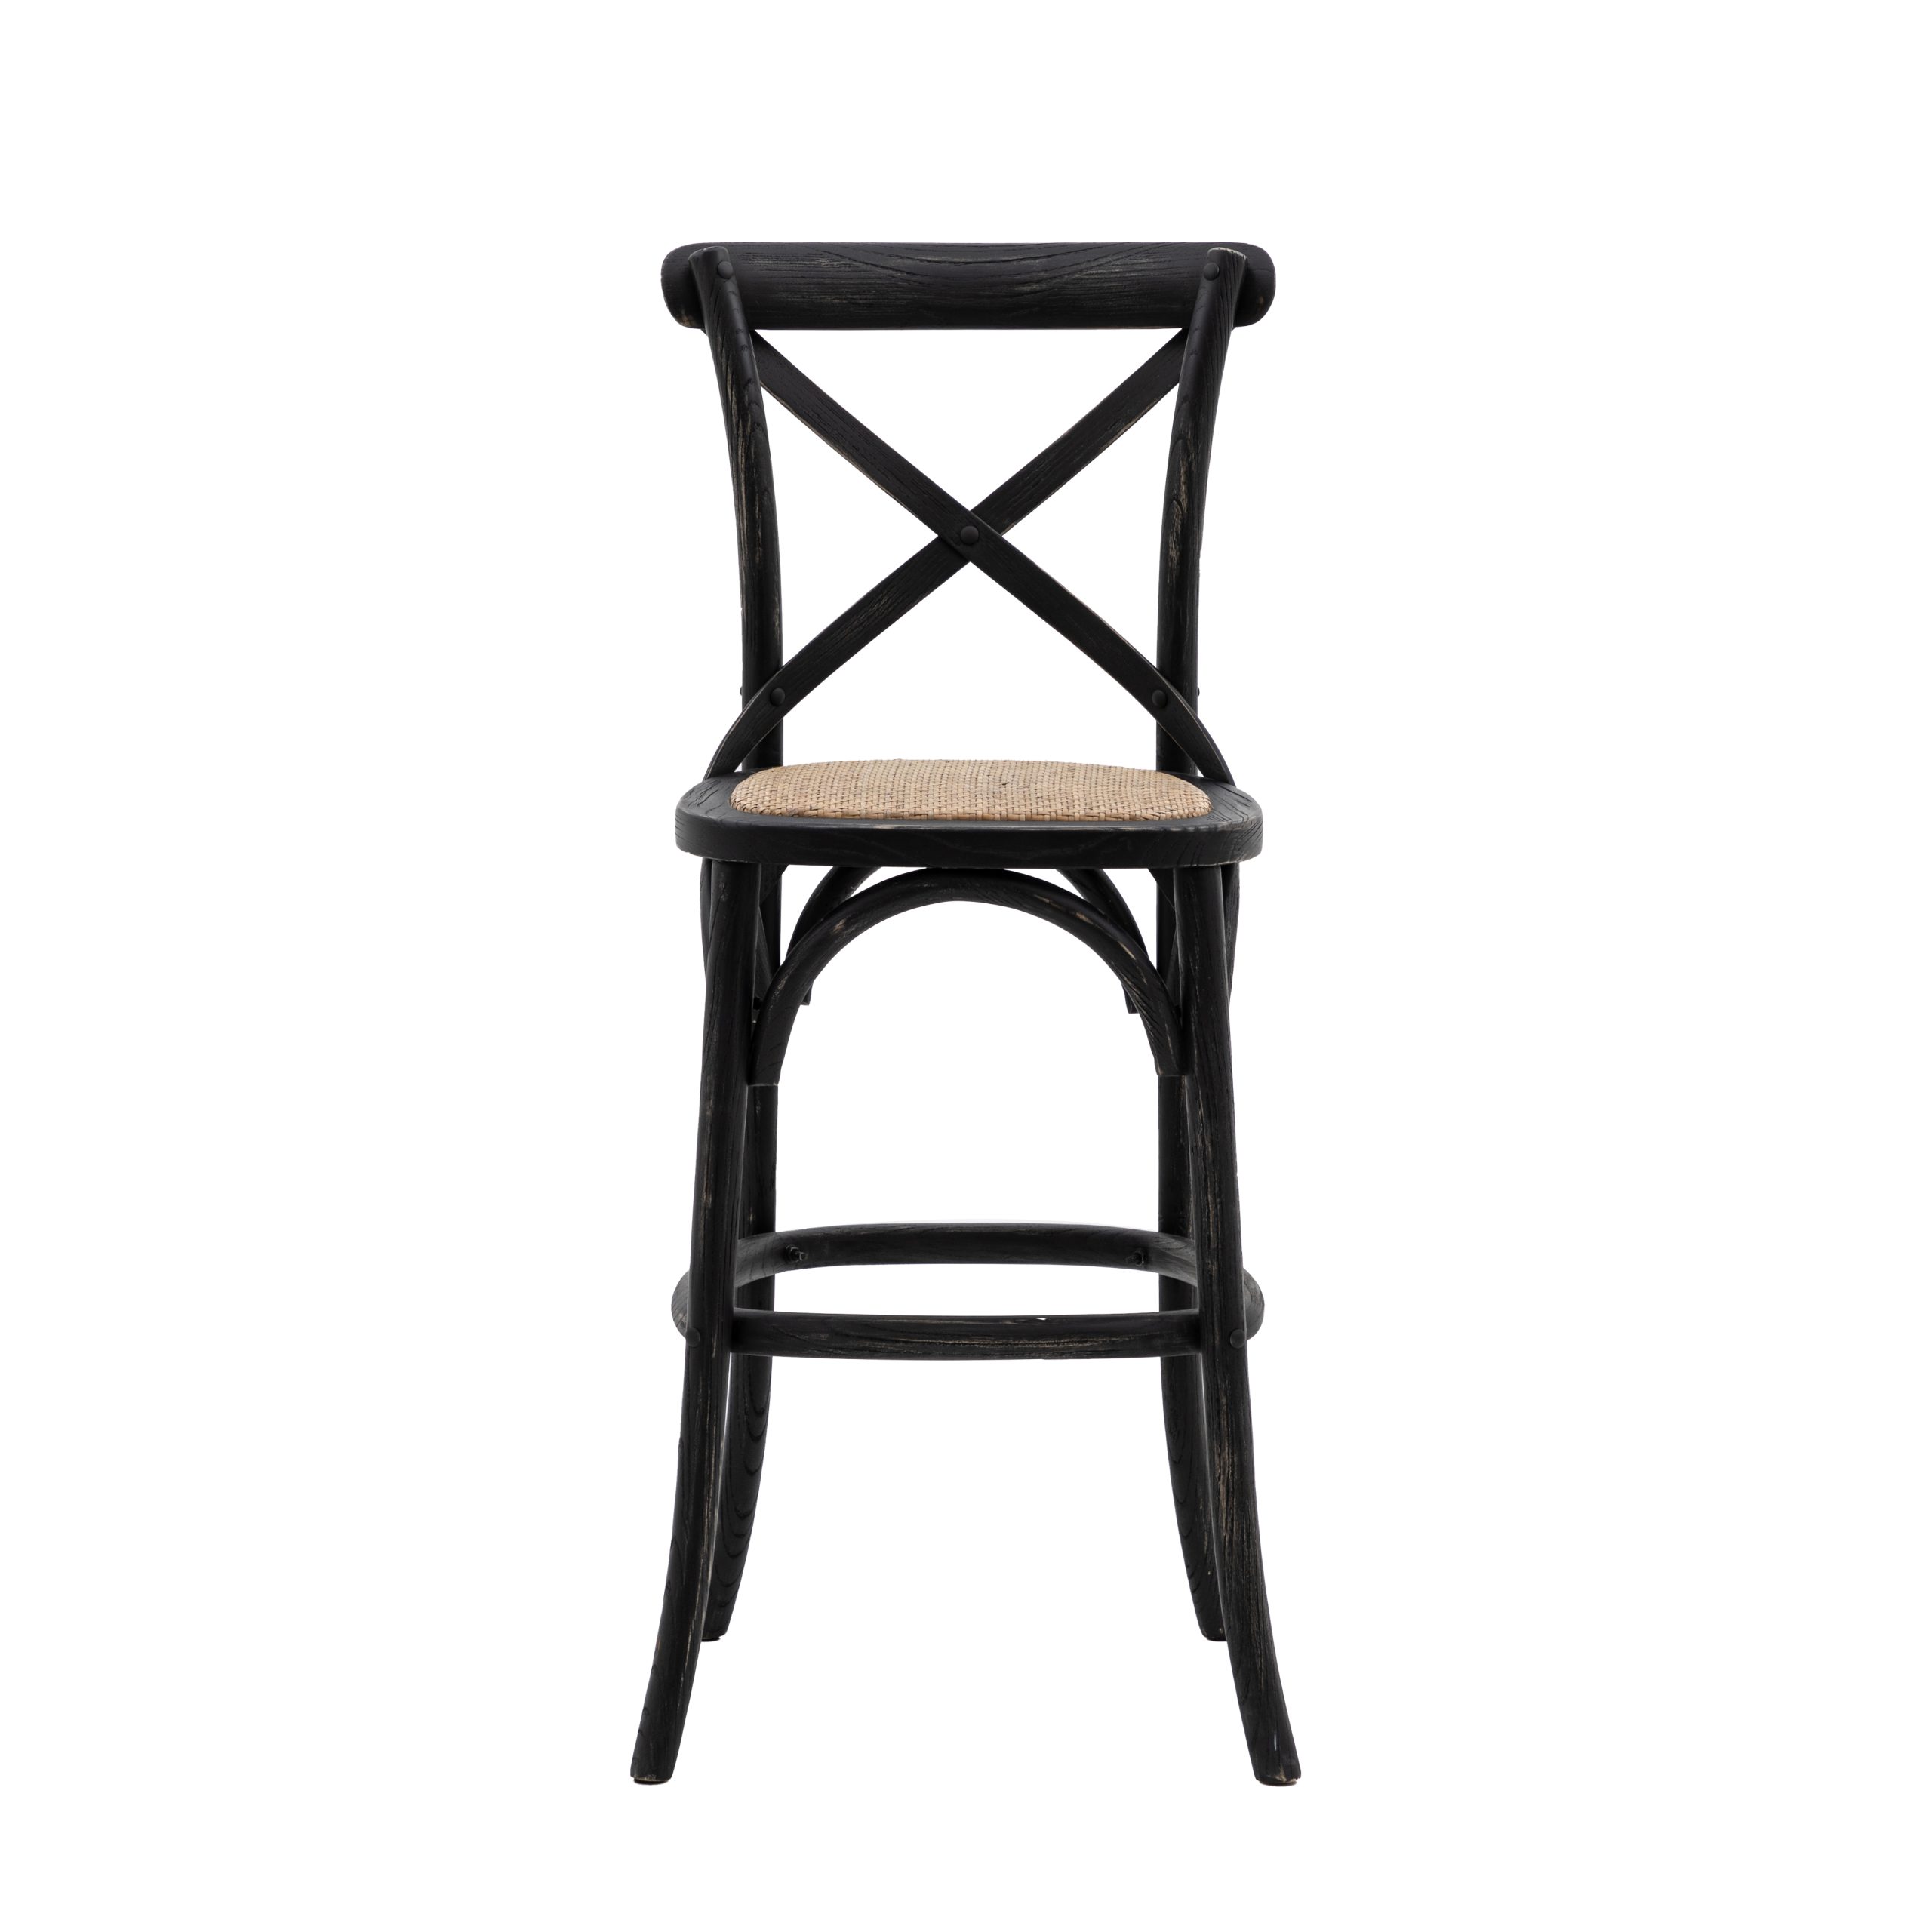 Gallery Direct Cafe Stool Black/Rattan (Set of 2)